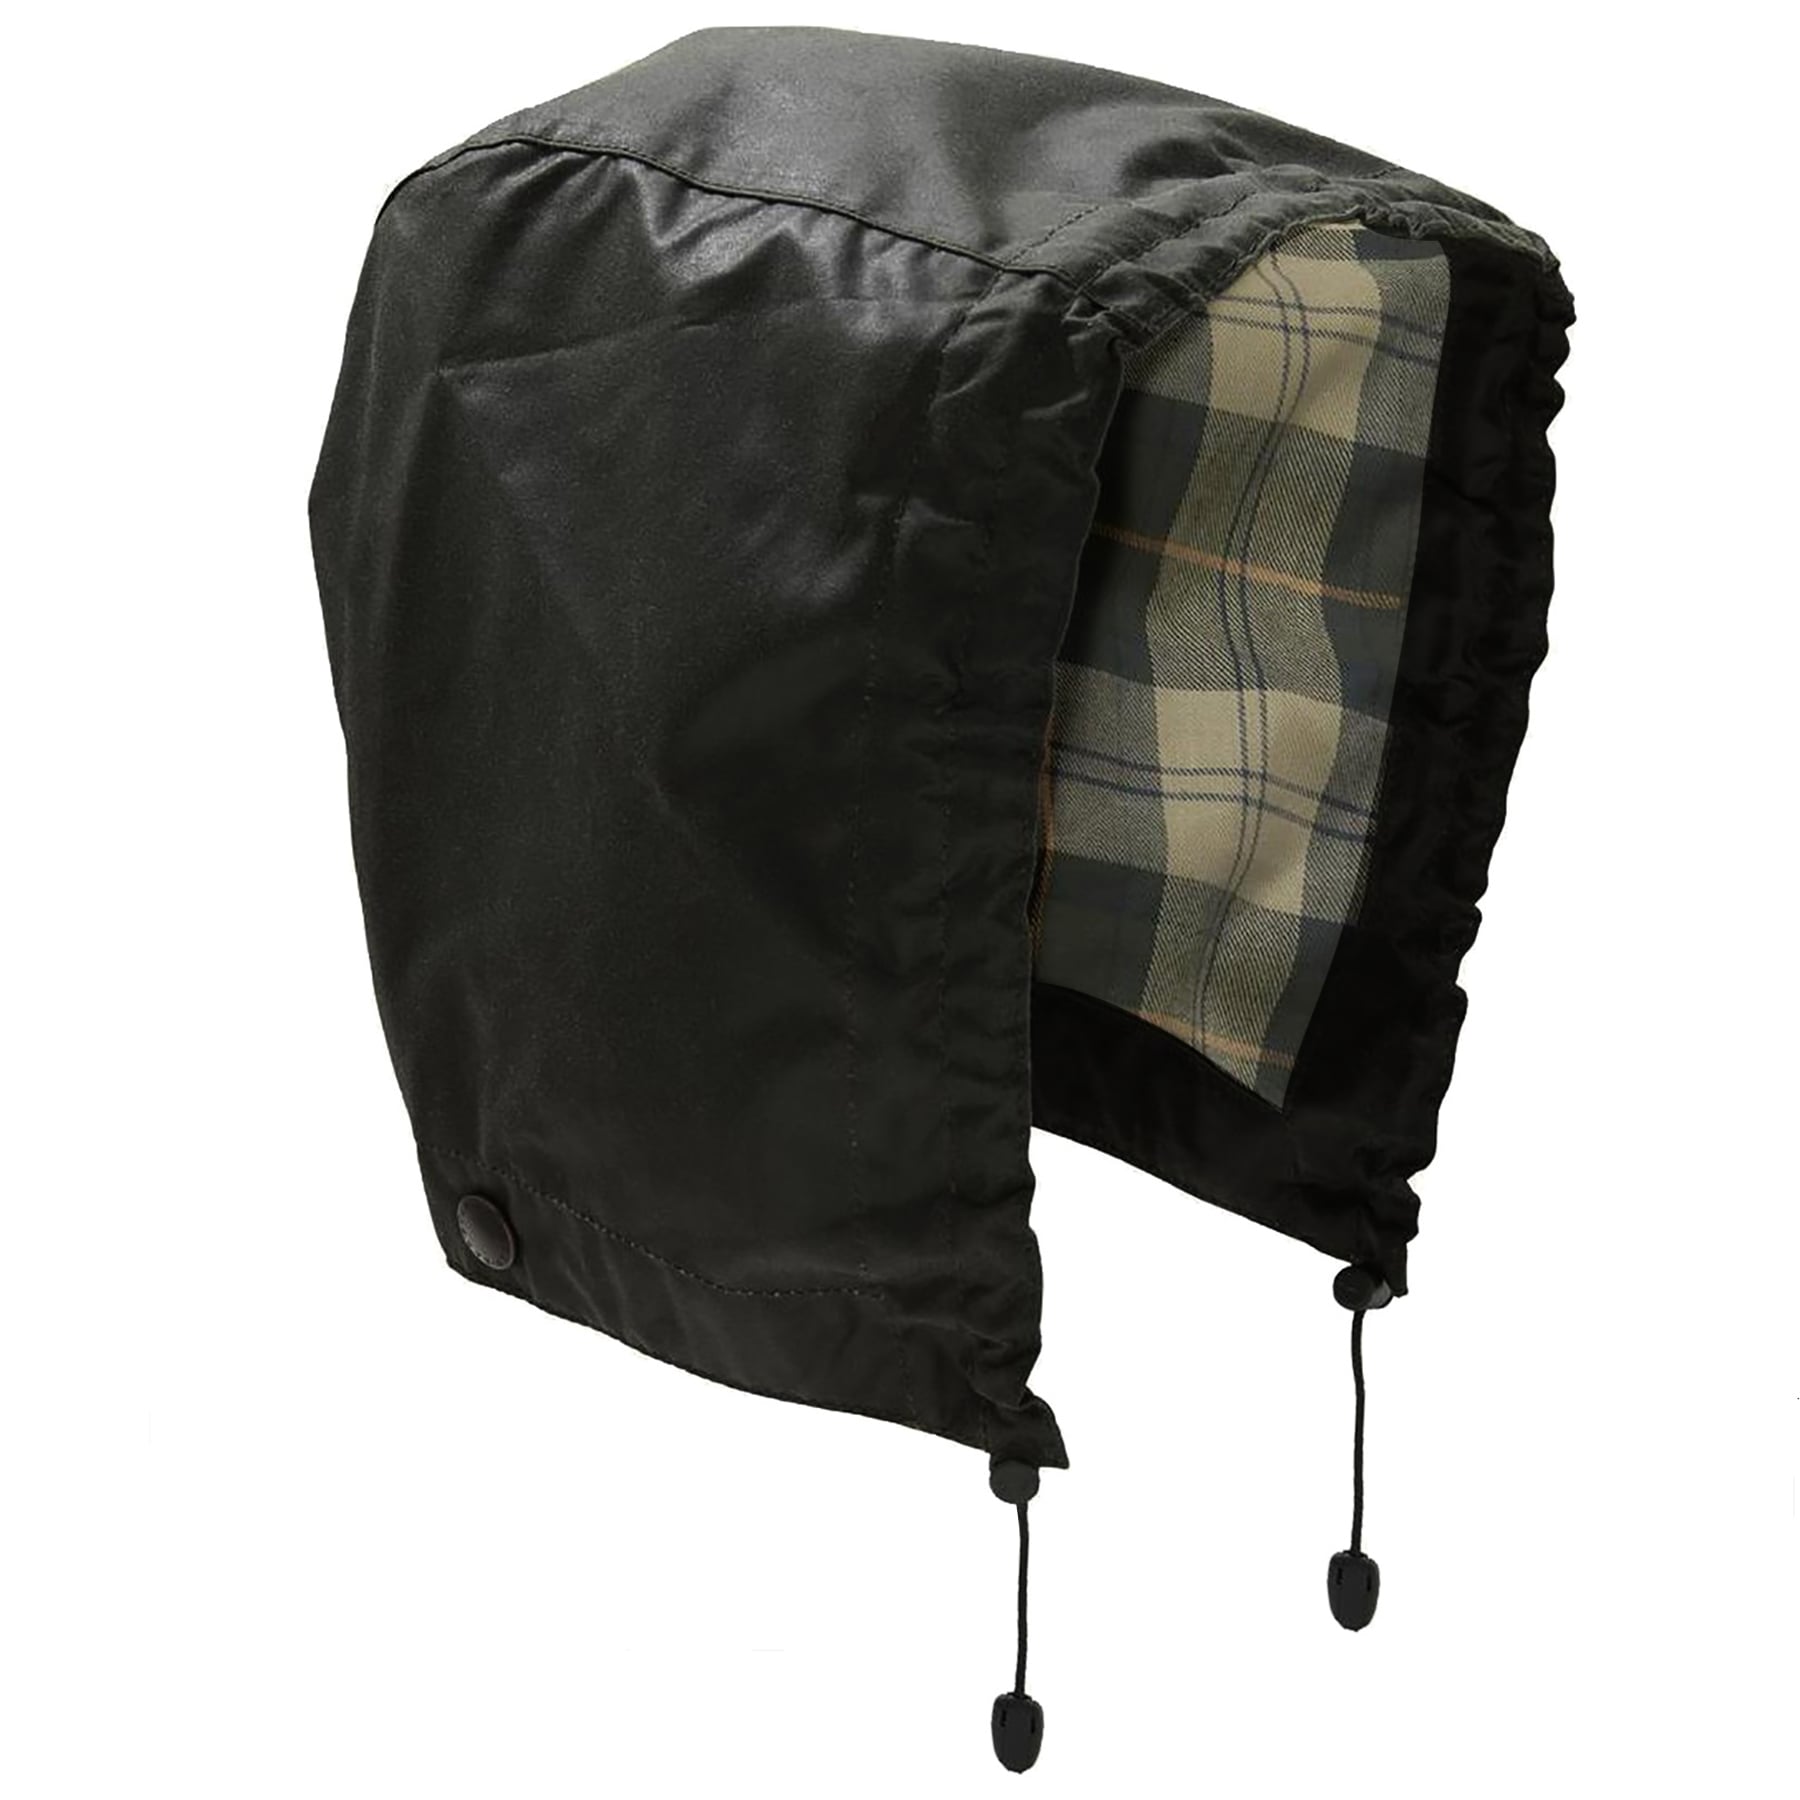 Barbour Review - Must Read This Before Buying